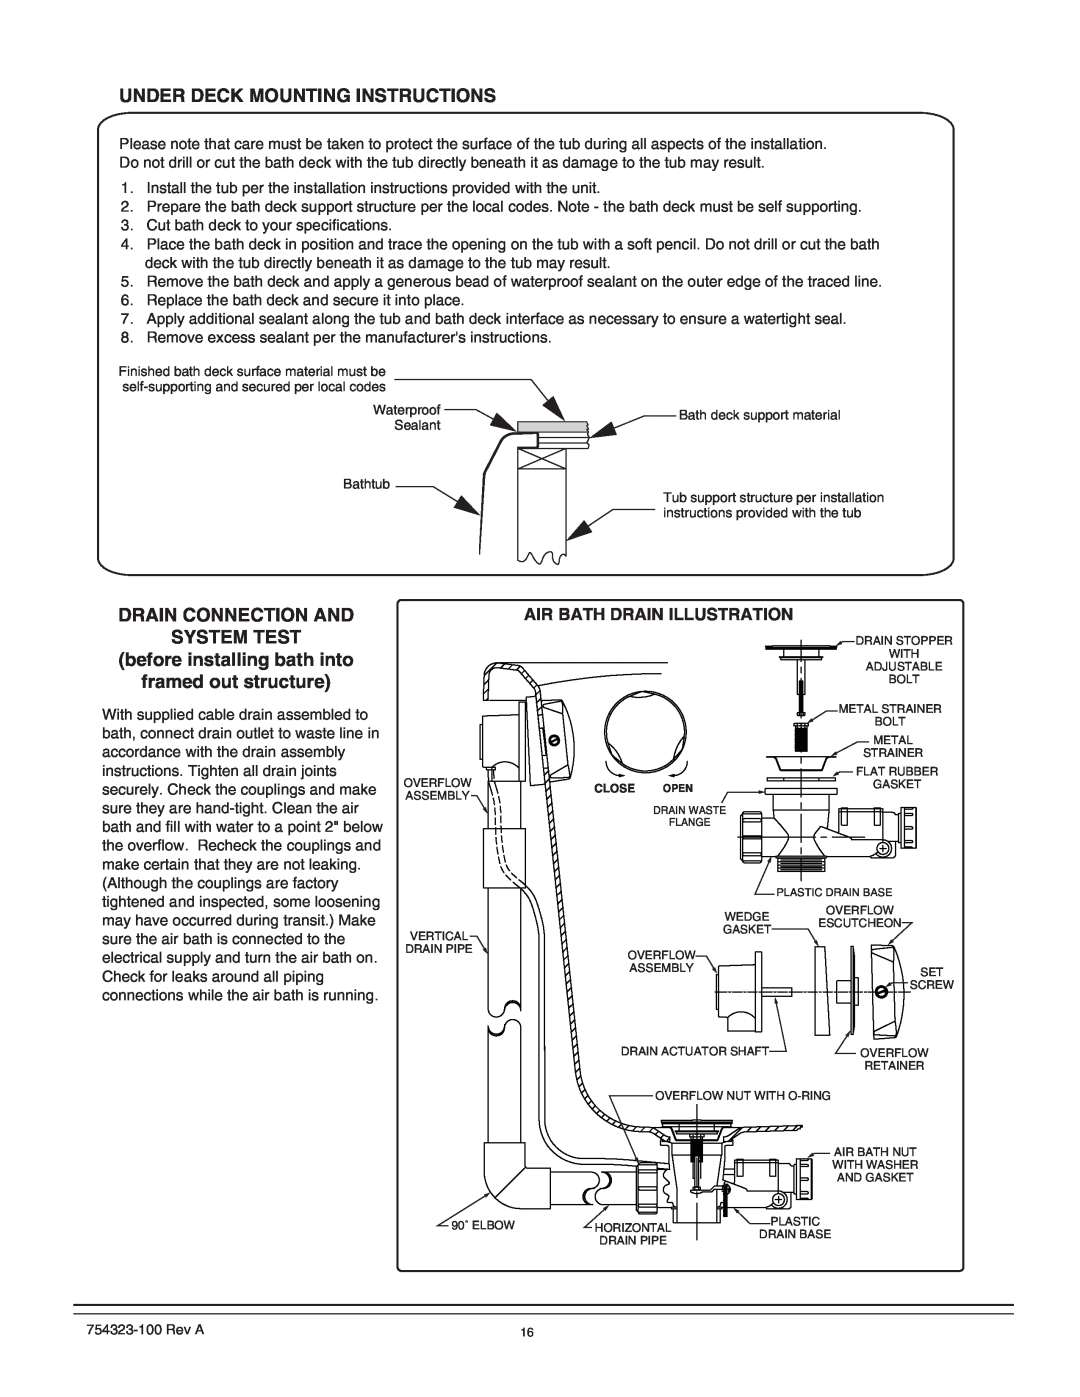 American Standard American Standard bath manual Under Deck Mounting Instructions, Drain Connection And System Test 